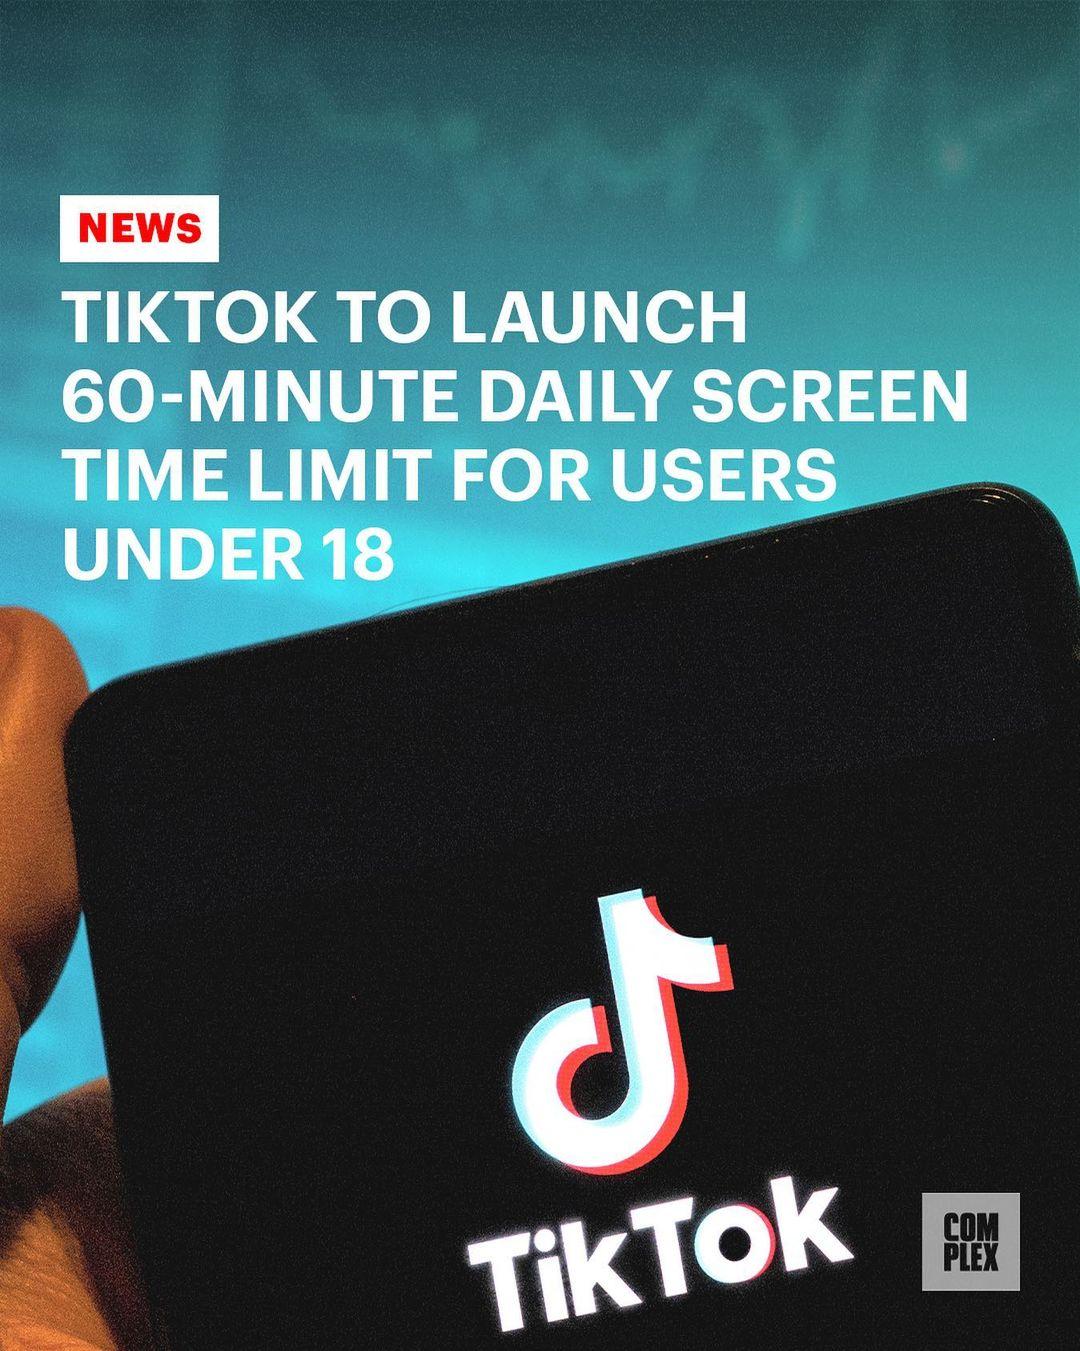 class="content__text"
 TikTok has announced several new features for teen users, including a 60-minute daily screen time limit. Link in bio 🔗 for all the details. 
 